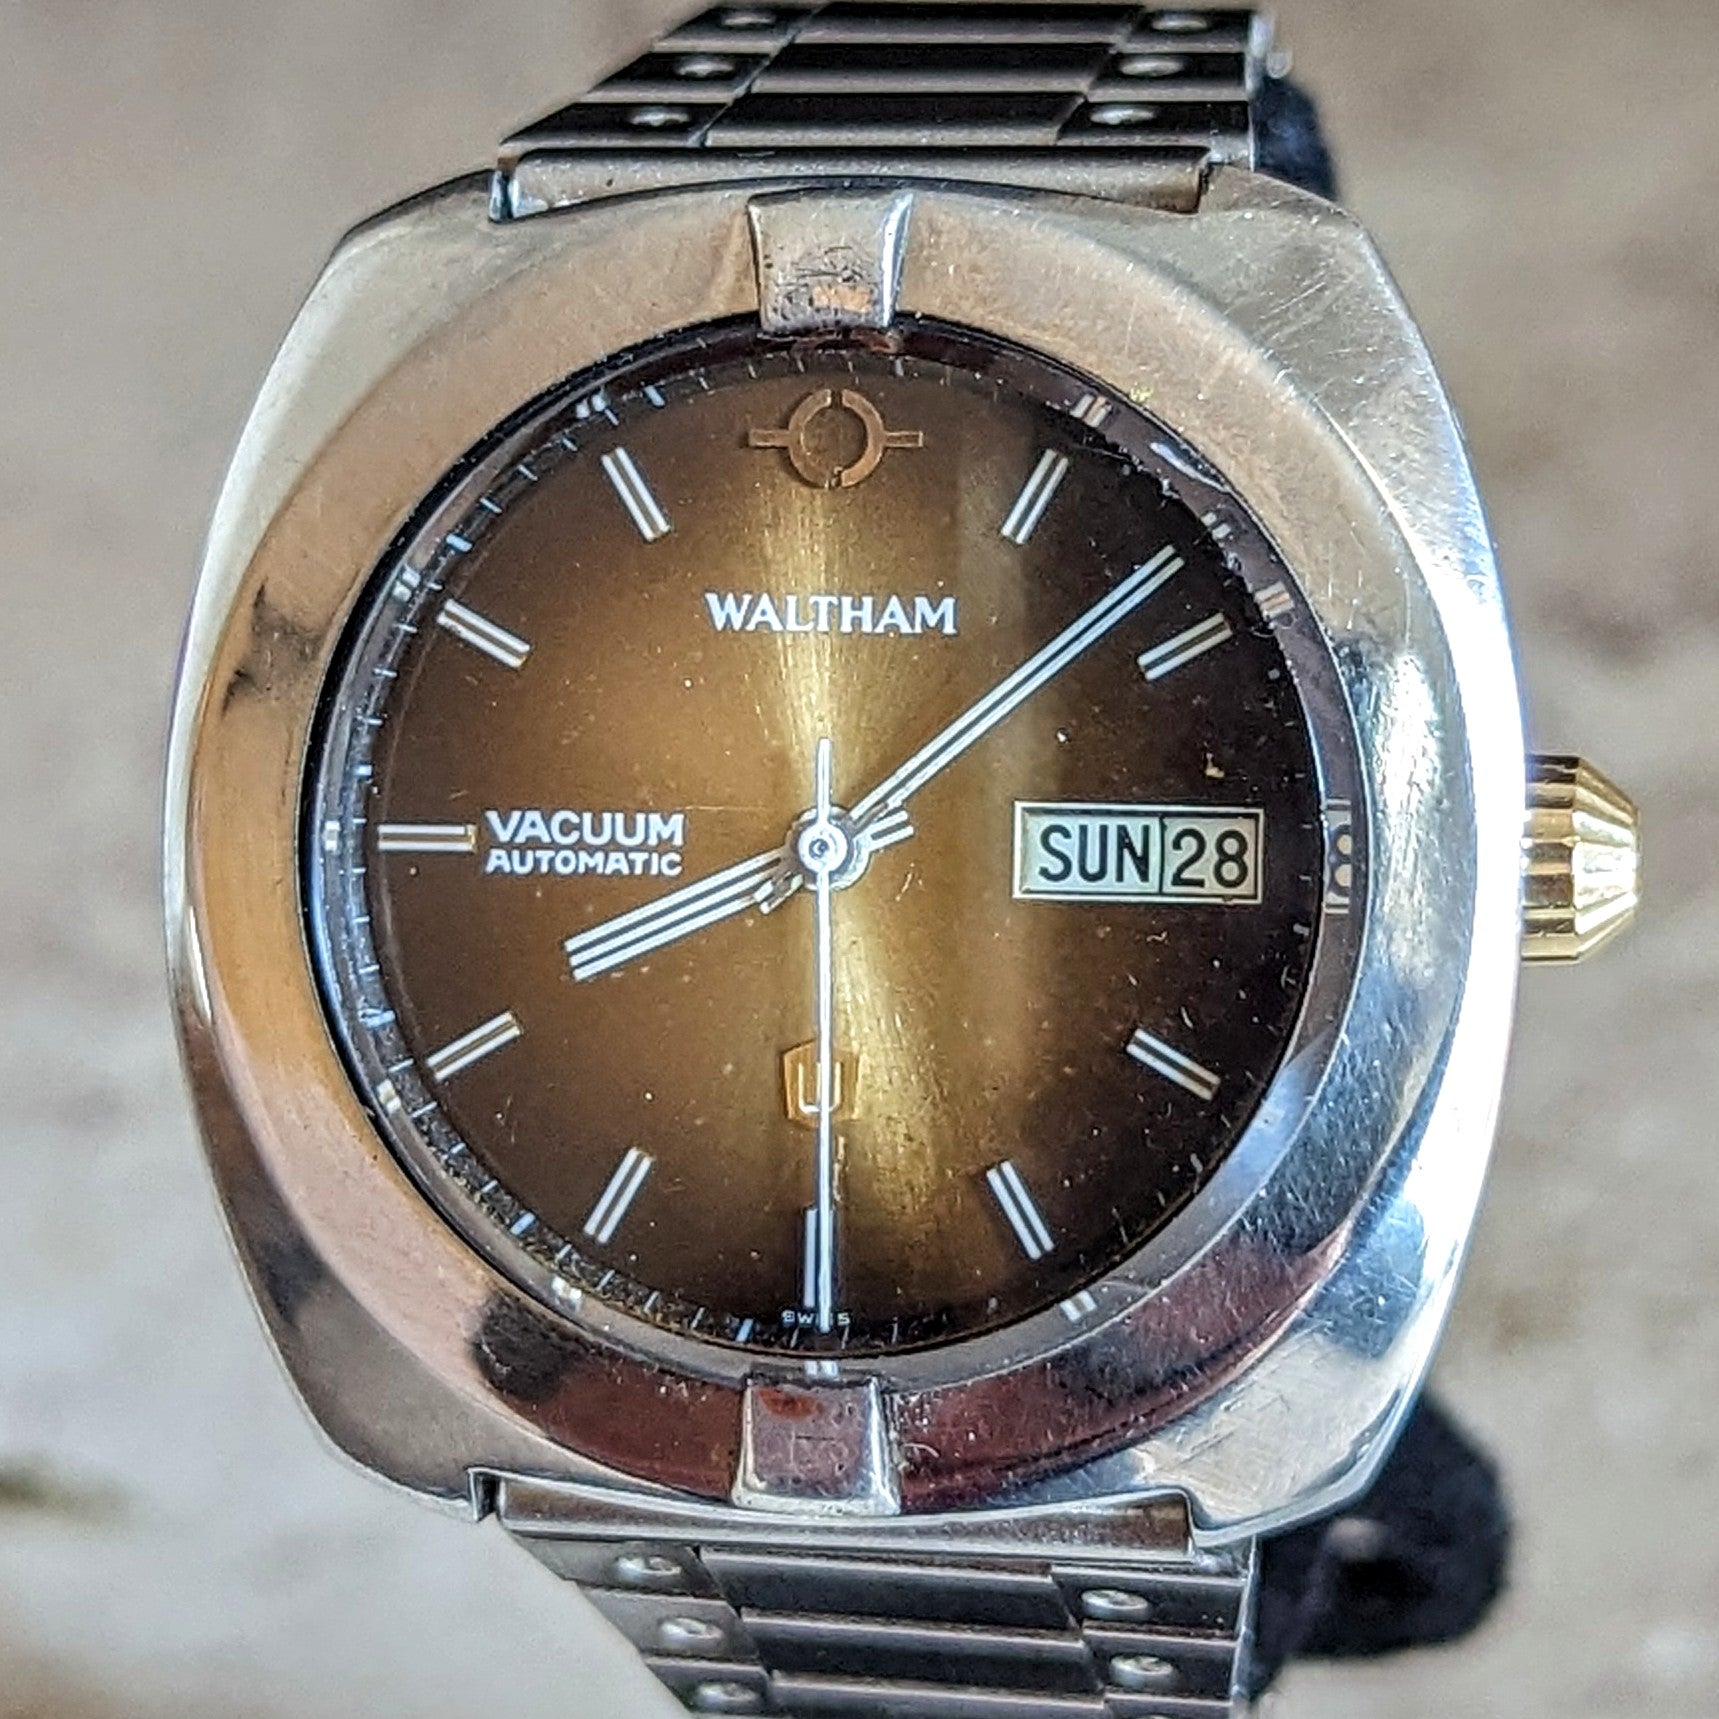 WALTHAM VACUUM Automatic Wristwatch Day/Date 1970s Vintage Watch